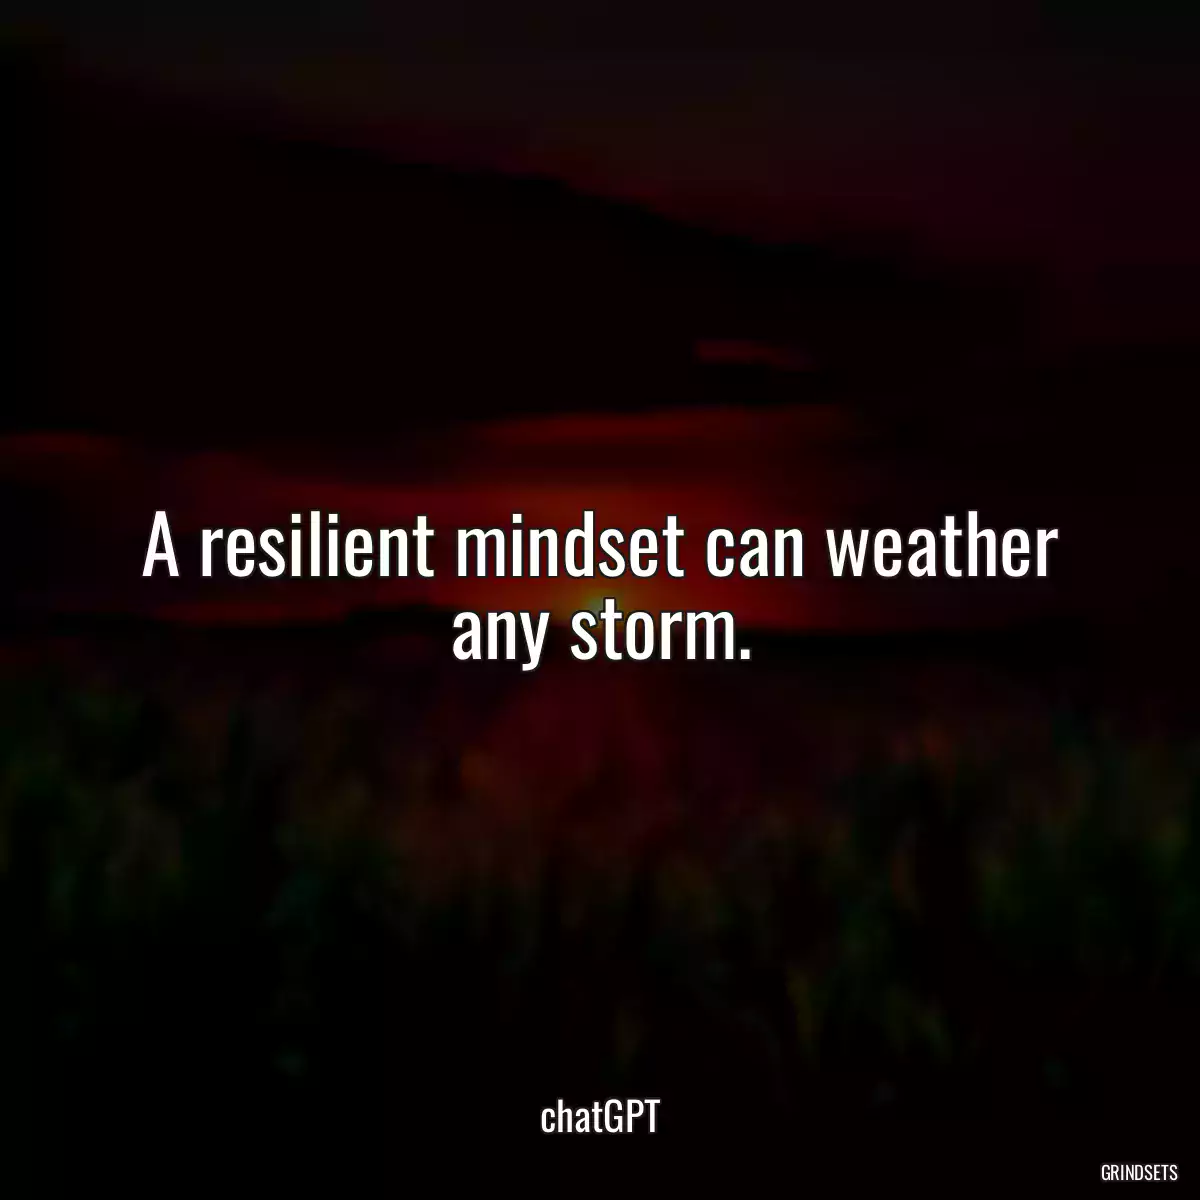 A resilient mindset can weather any storm.